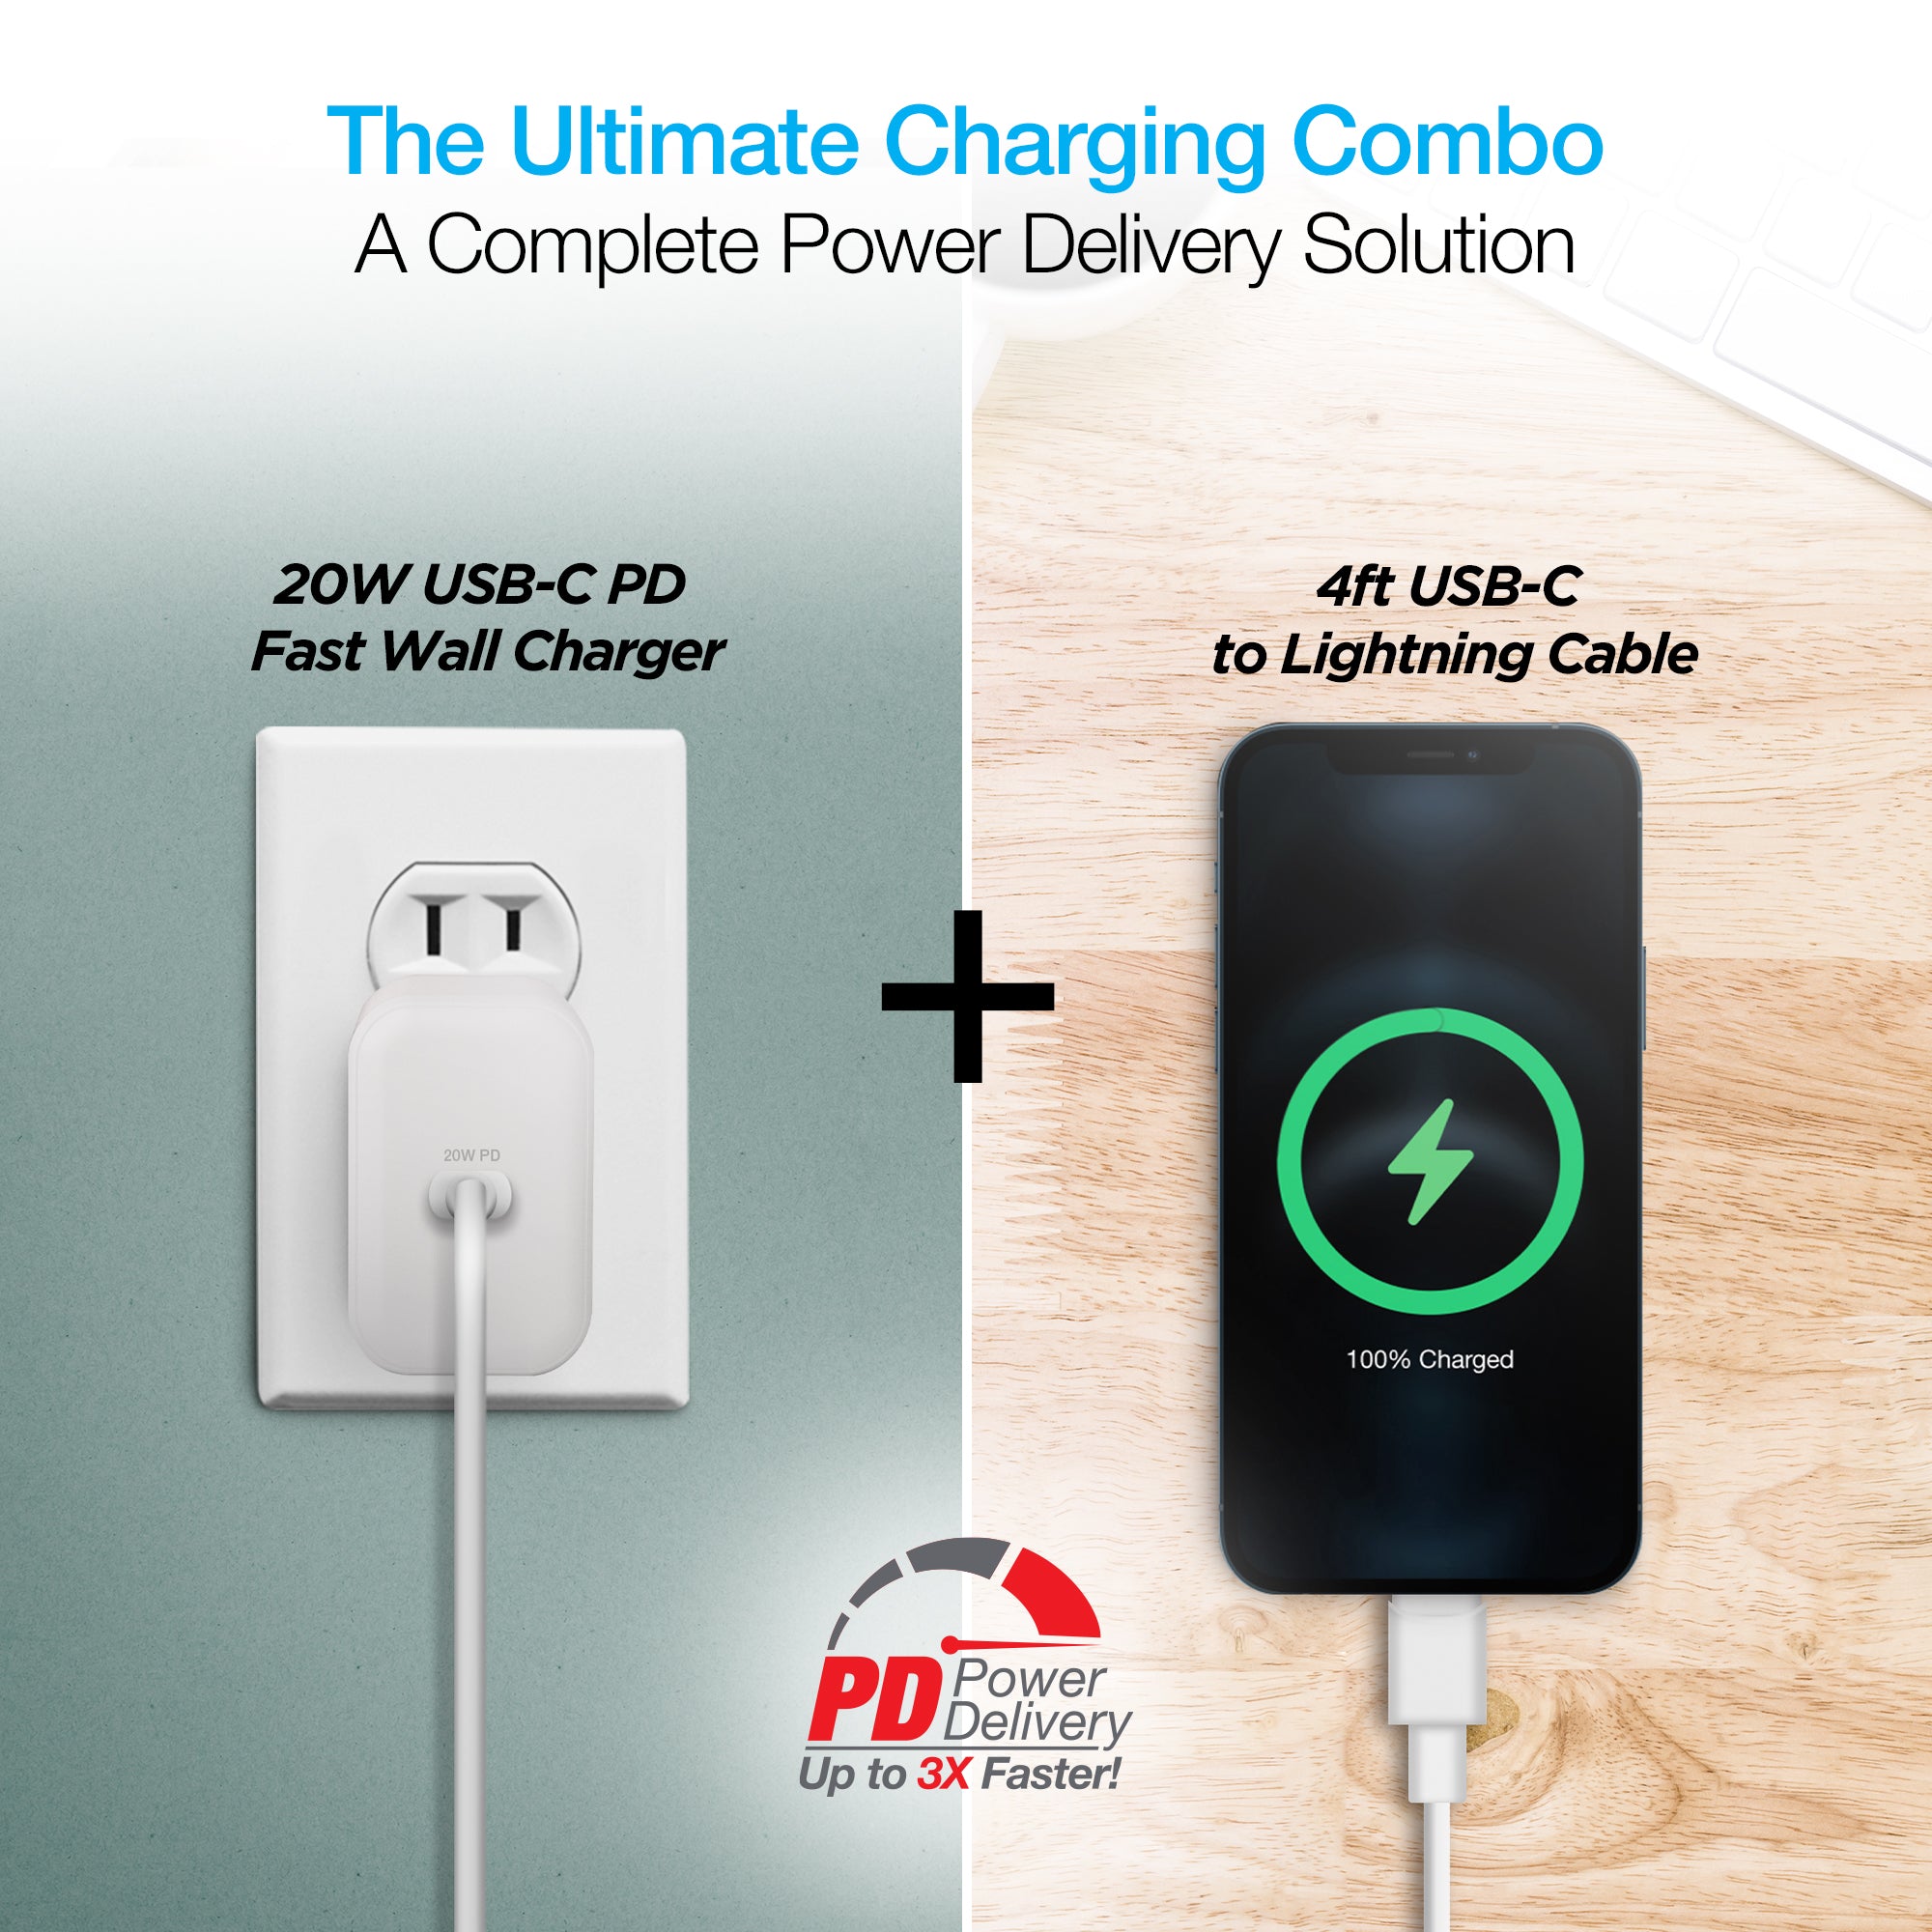 Tripp Lite USB-C Wall Charger Compact with 4 ft. USB-C to Lightning Cable -  GaN Technology, 18W PD Charging, White power - U280-W01-18C1-K - Cell Phone  Accessories 